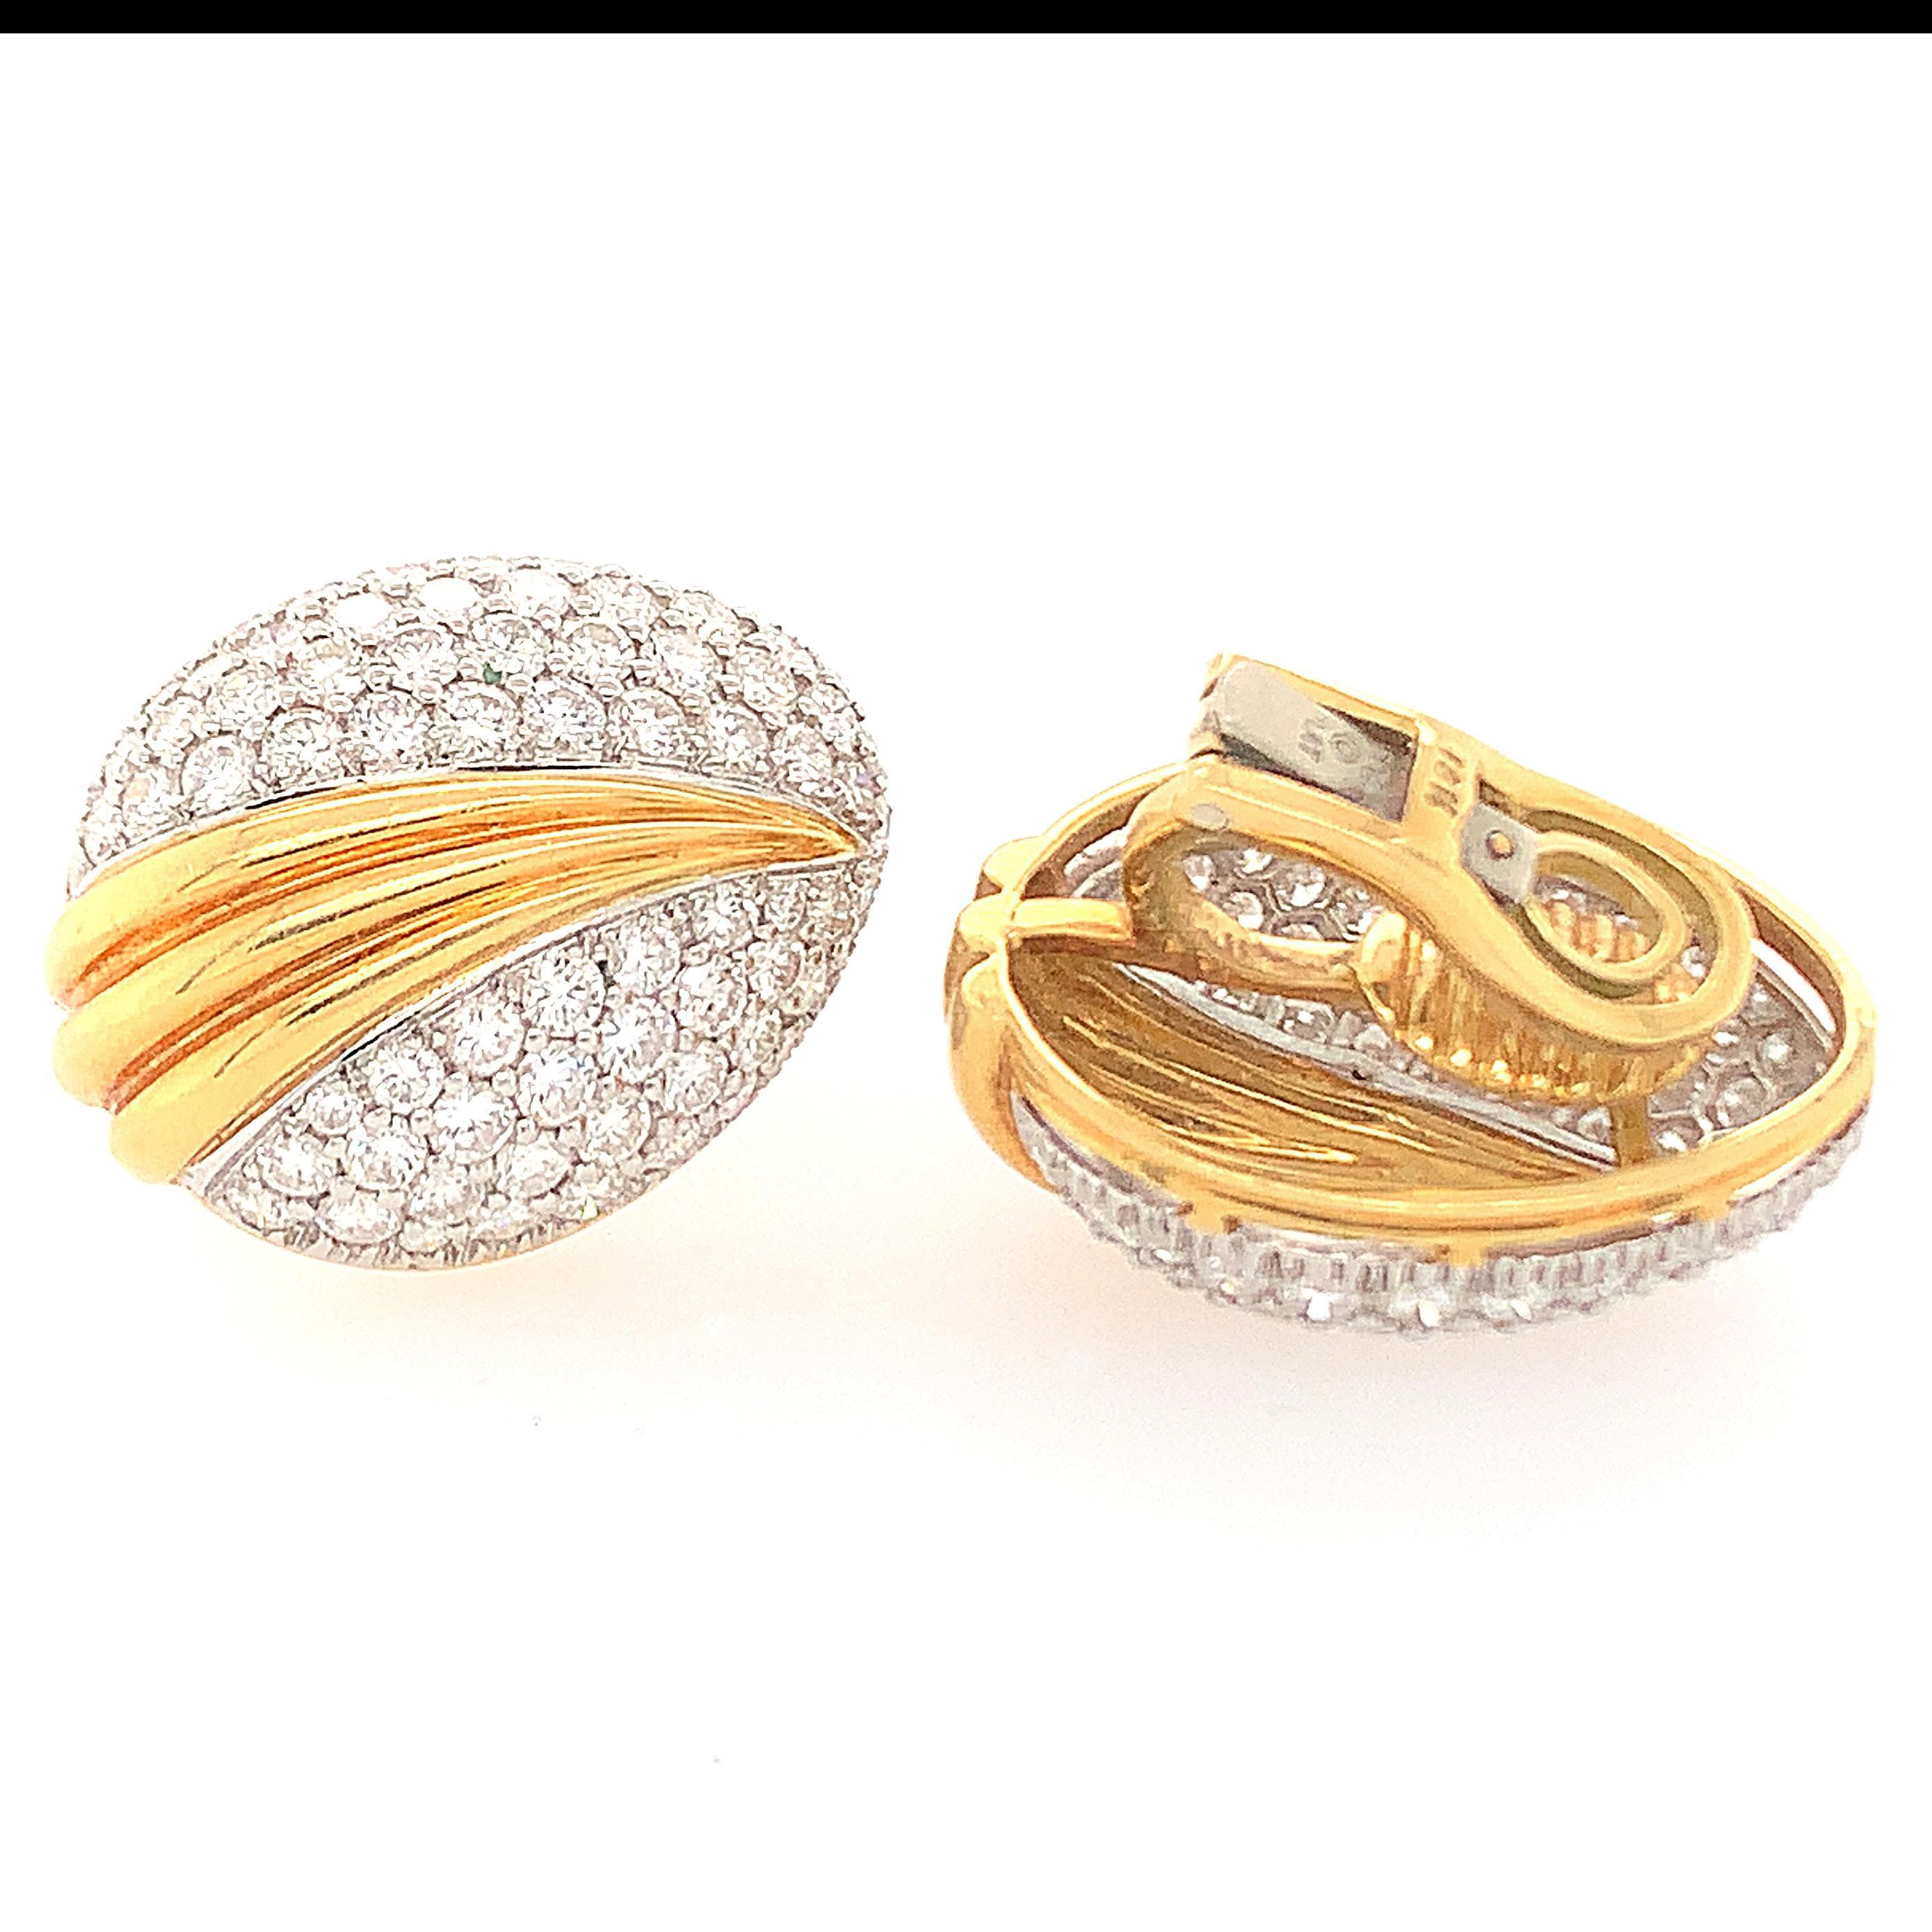 Platinum and 18K Y/gold diamond earclips, RBC diamonds weighing approx. 8.00 cts, GH VS, stamps PLAT 18K TGD measures 1 x 3/4 inch, weight 16.2 dwt.